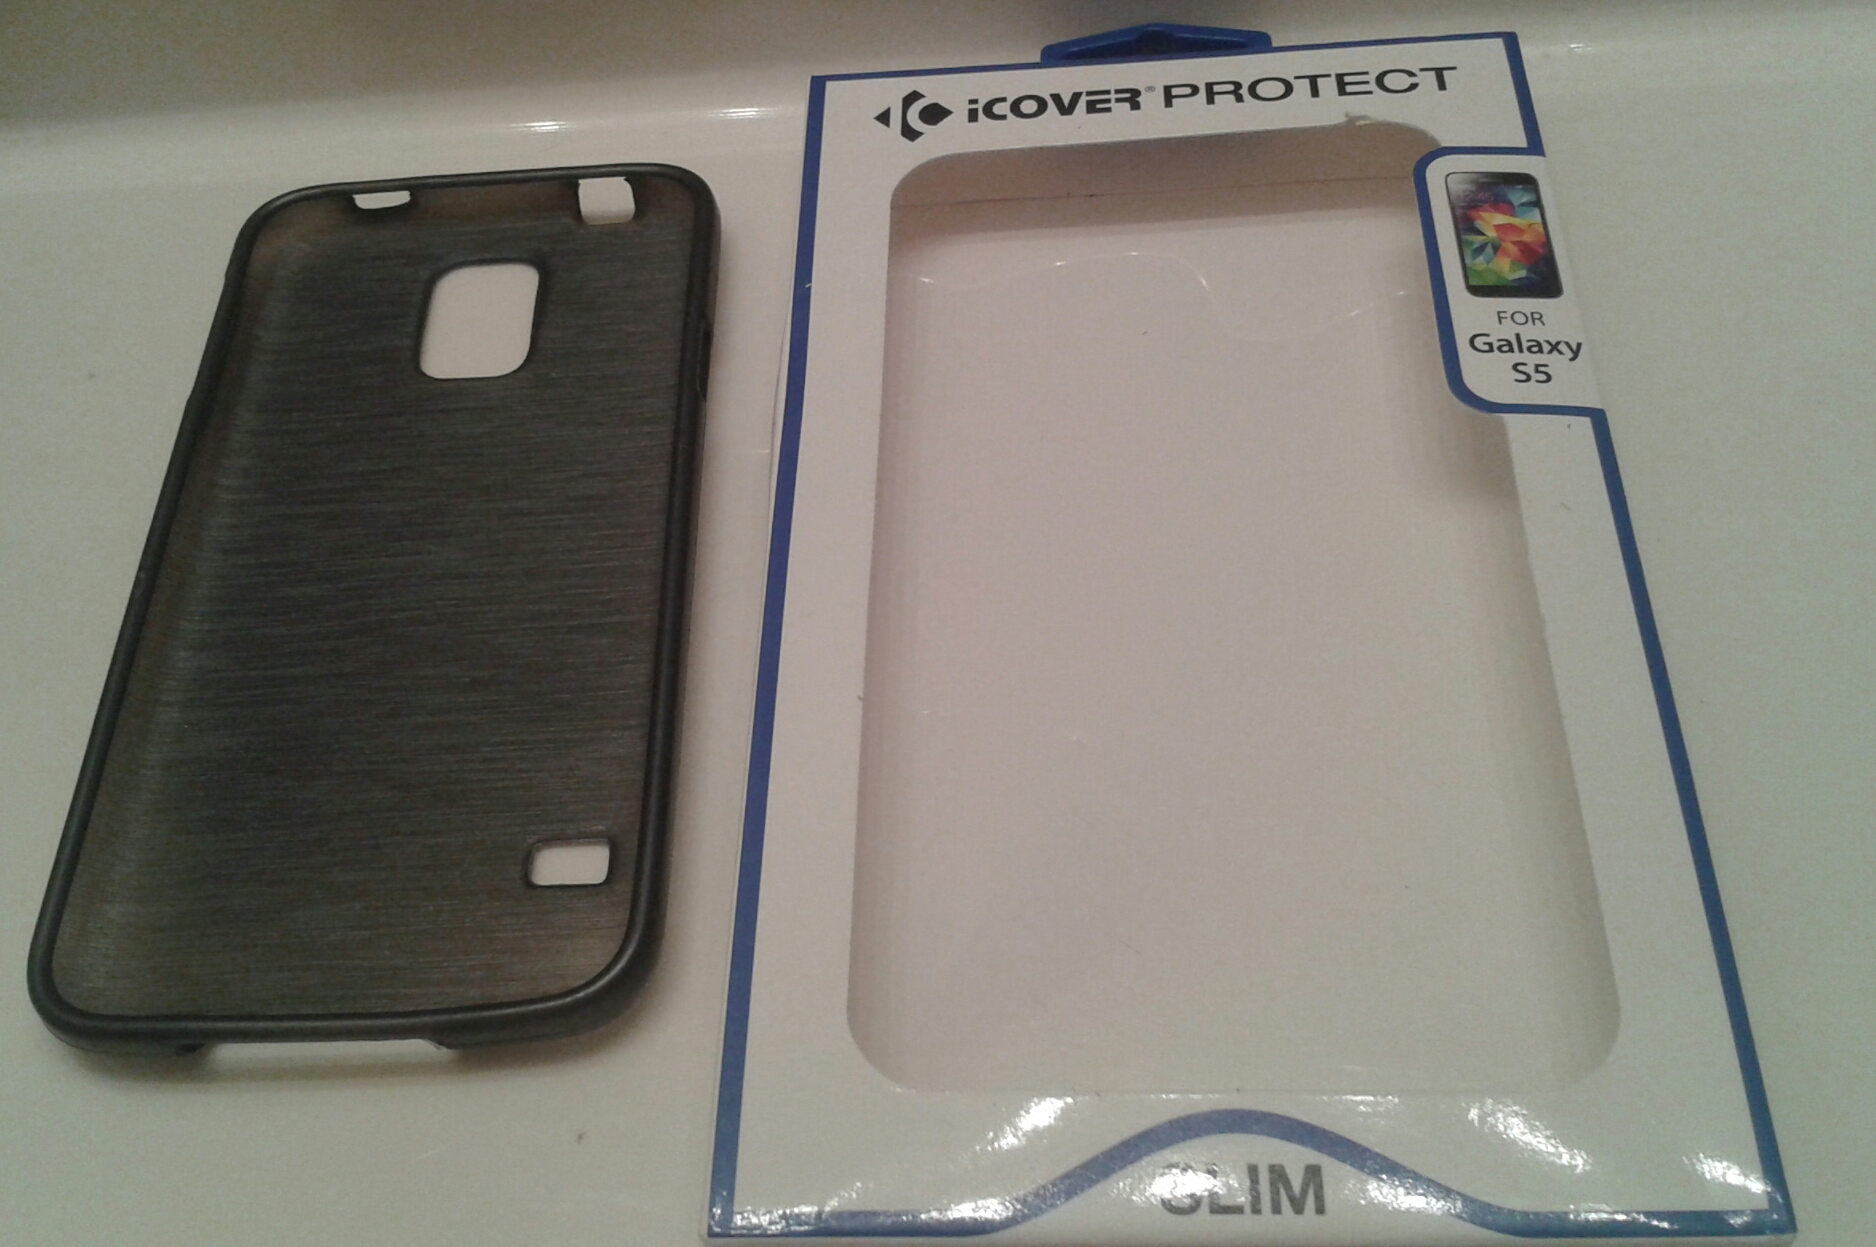 Galaxy S5 Smartphone Protective Cover